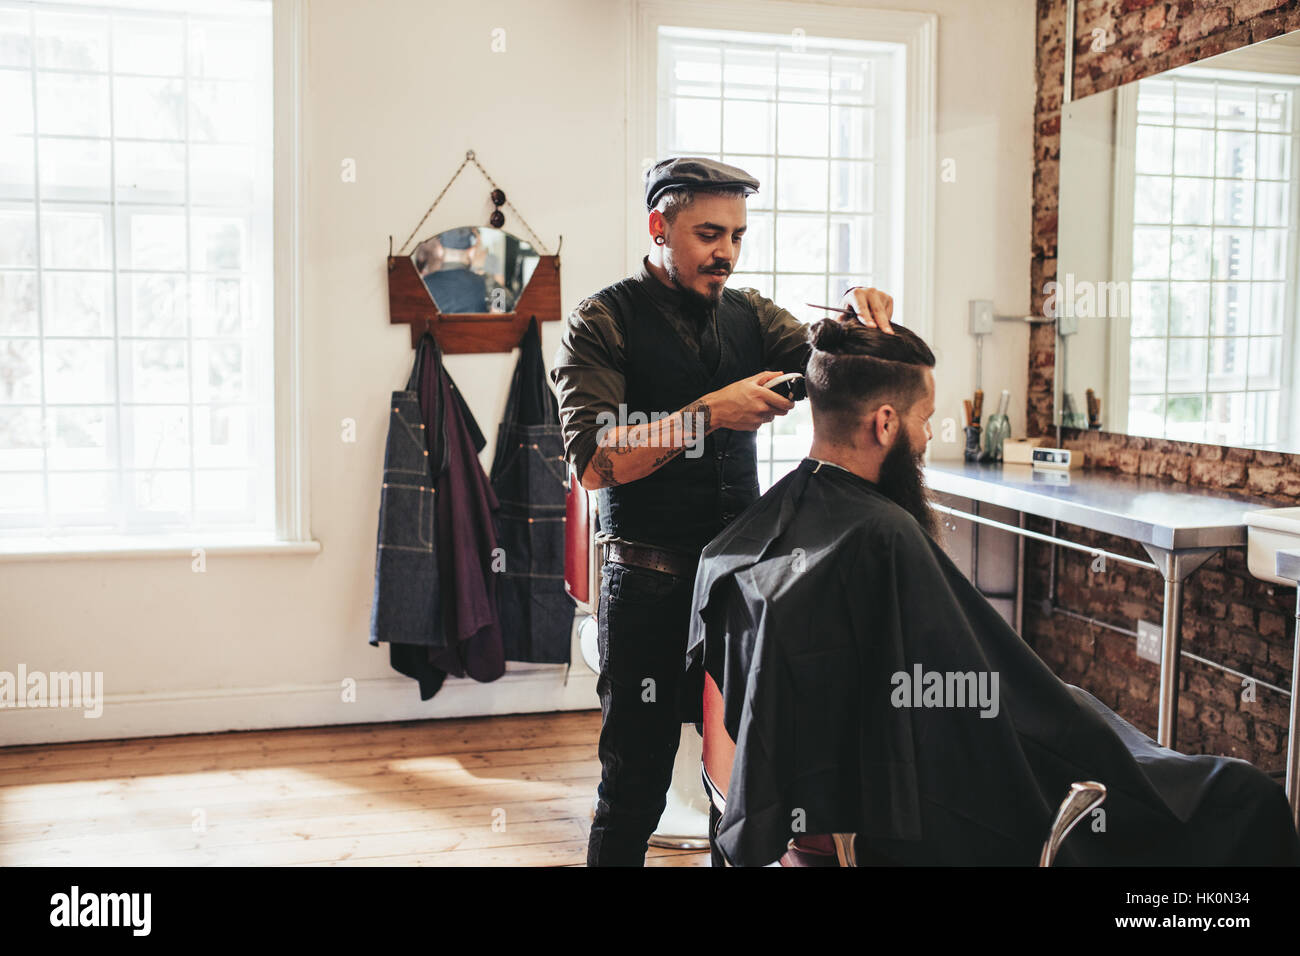 Male barber giving client haircut in shop. Hairdresser styling hair of client at salon. Stock Photo